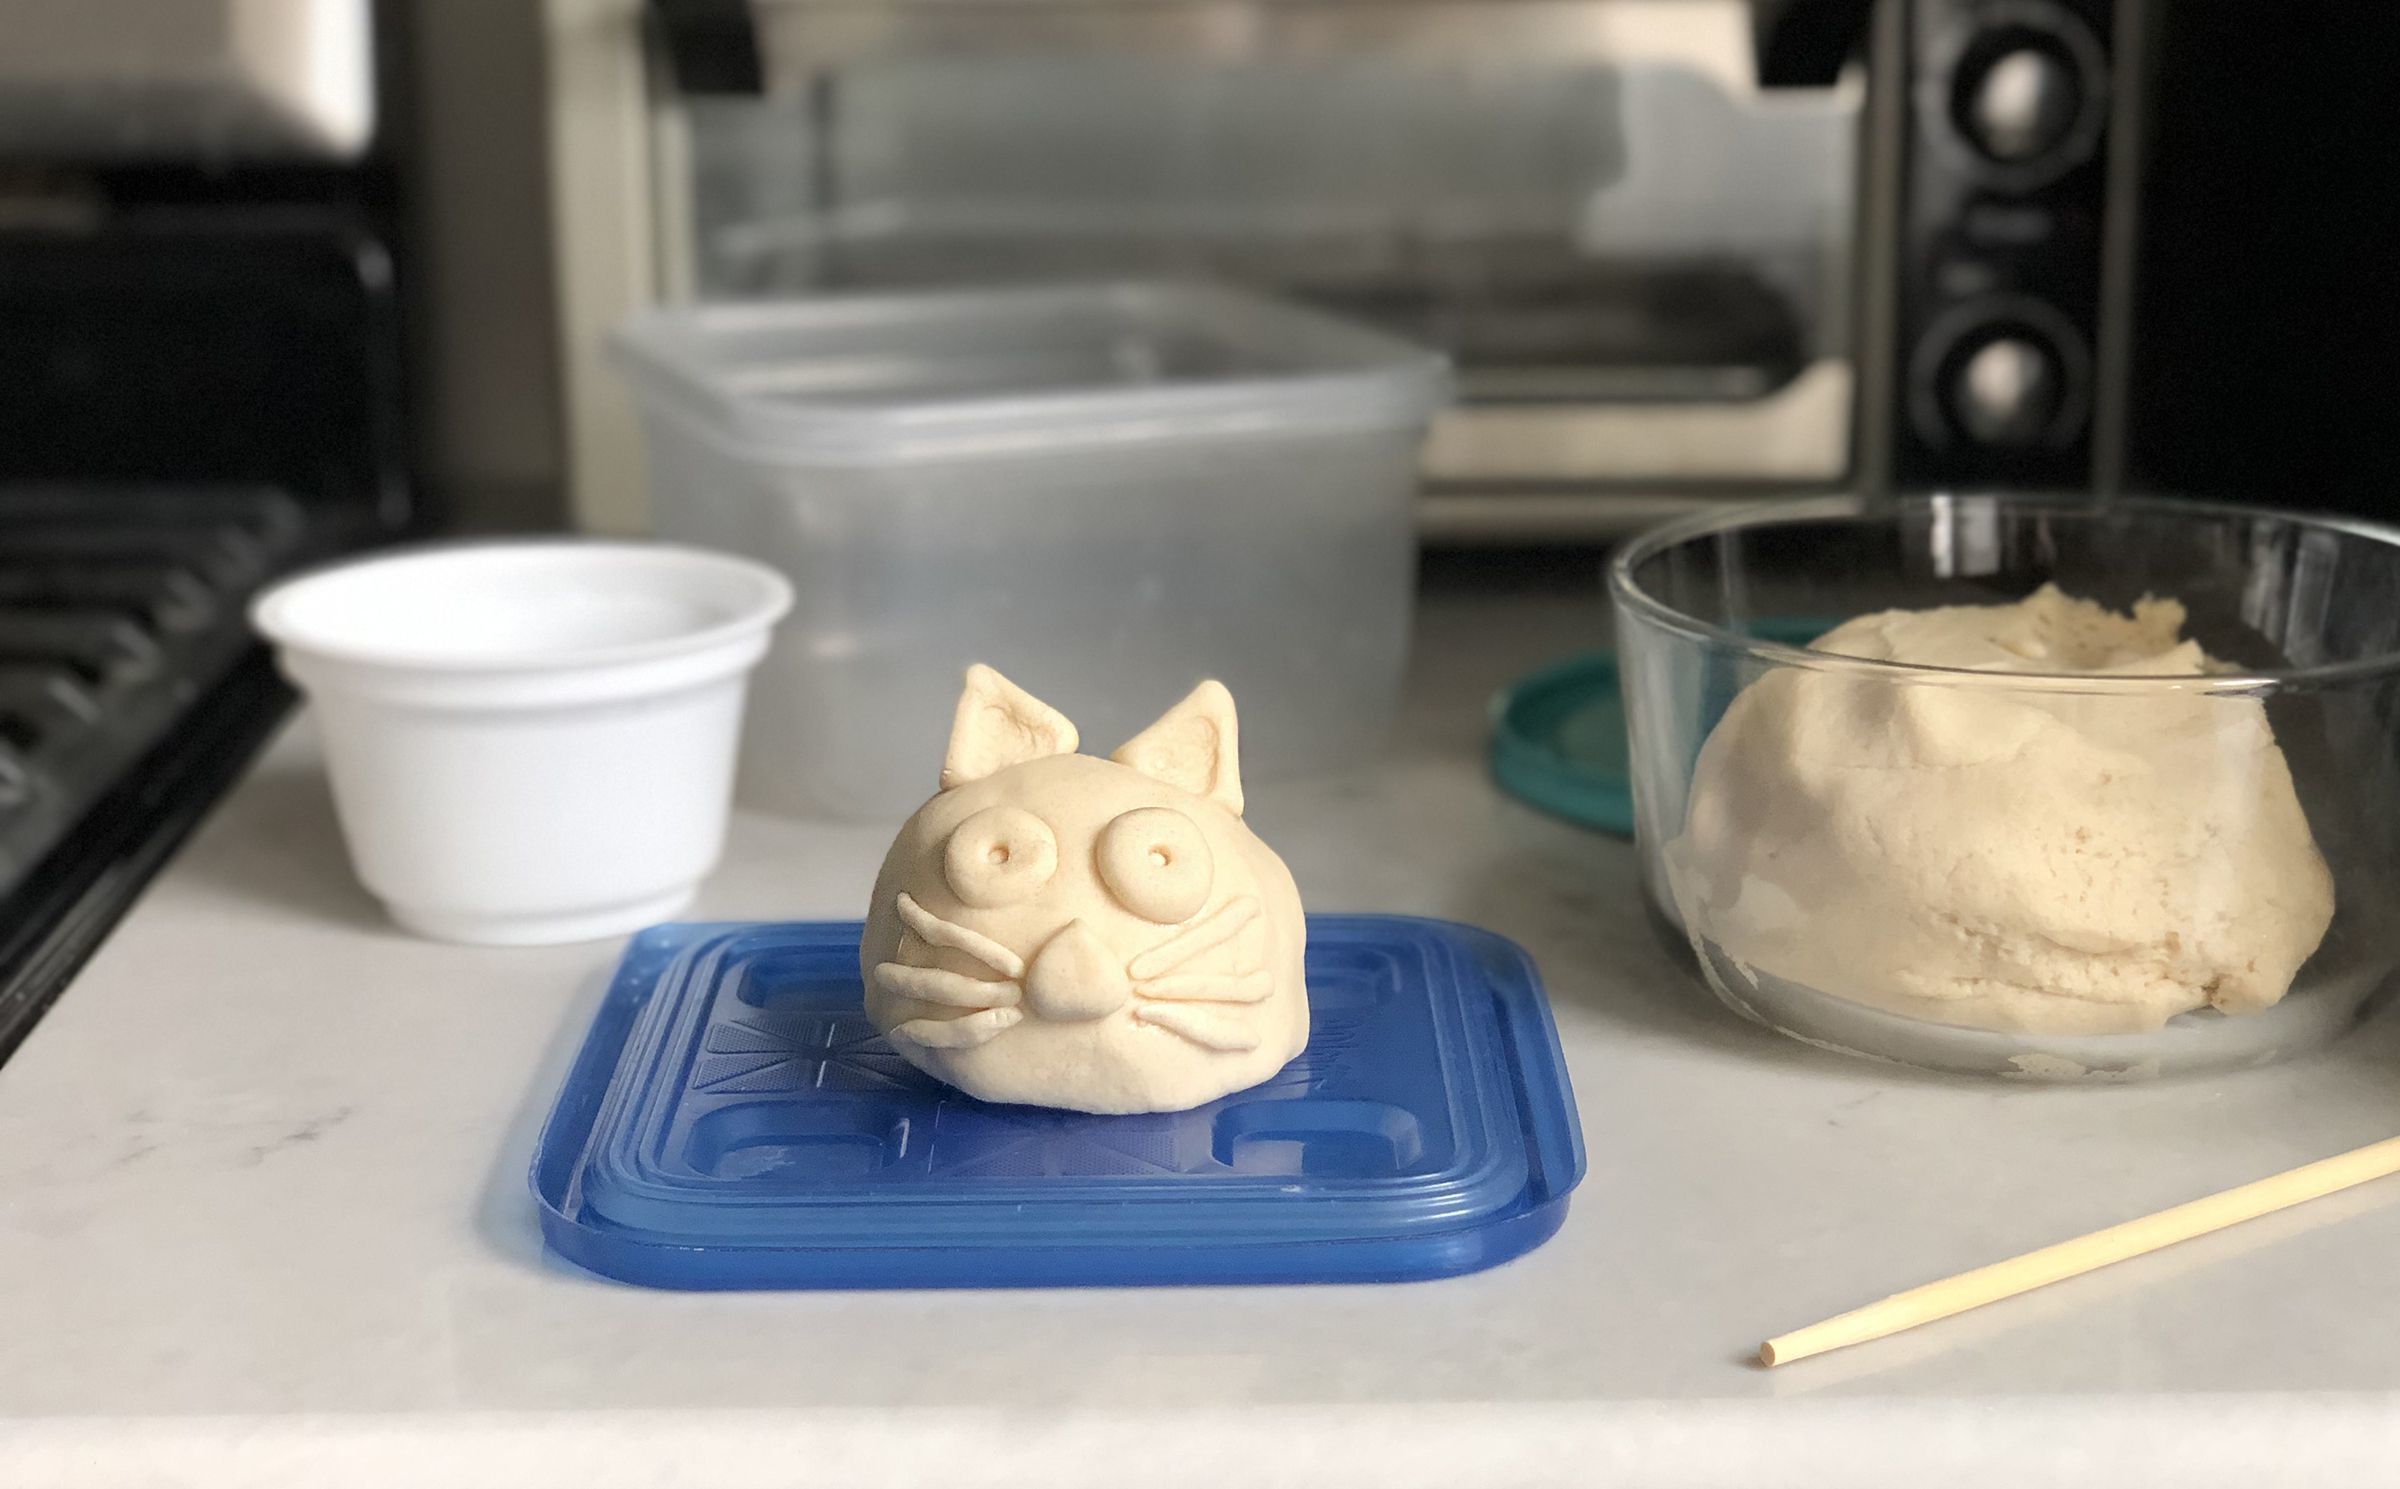 making clay sculptures at home